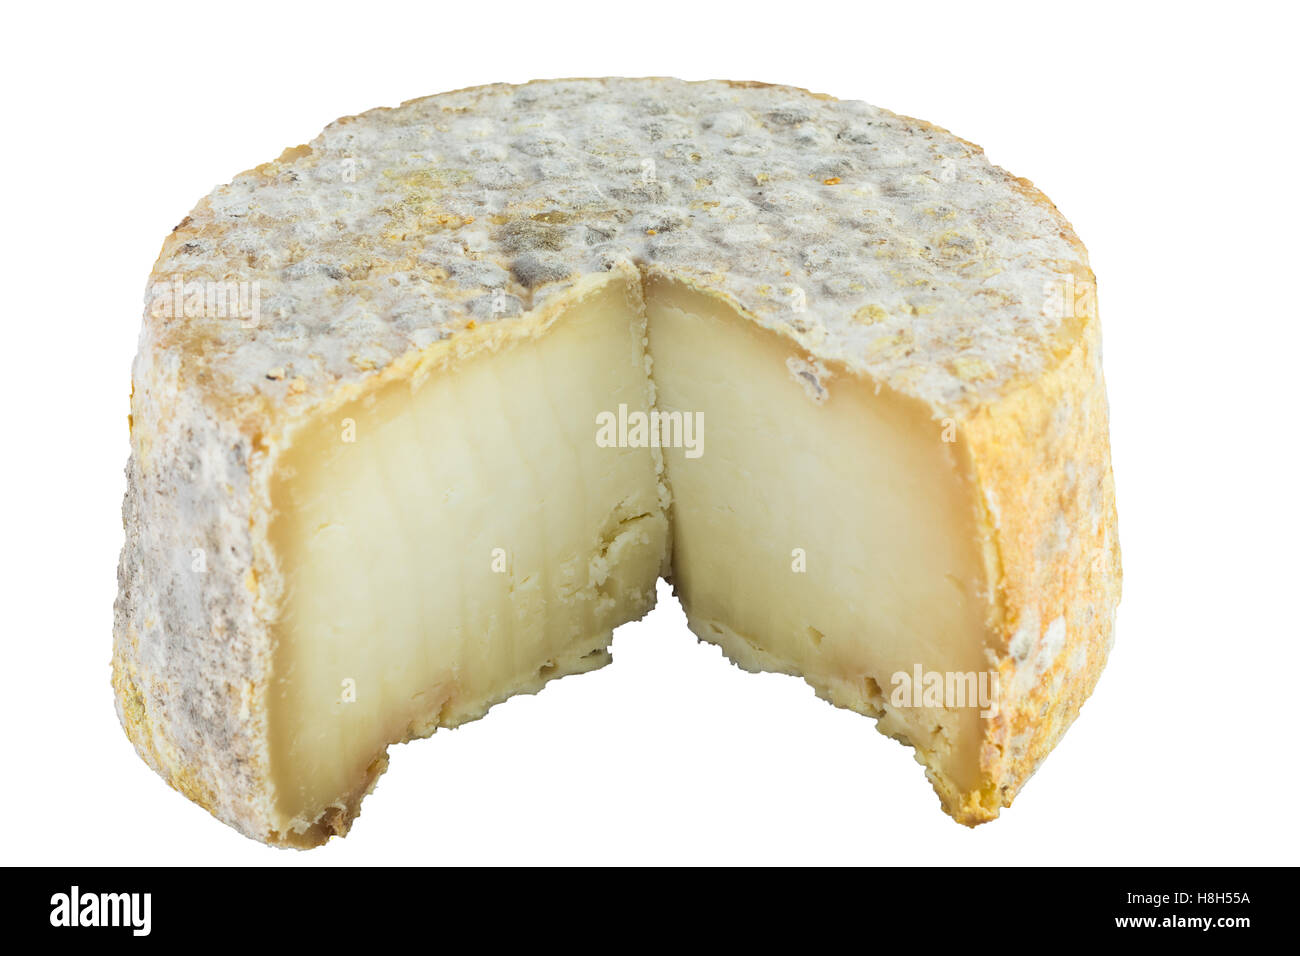 The form of hard cheese of a bloomy rind goat's milk, frost crust, treatment through special mold of the genus Penicillium, such Stock Photo